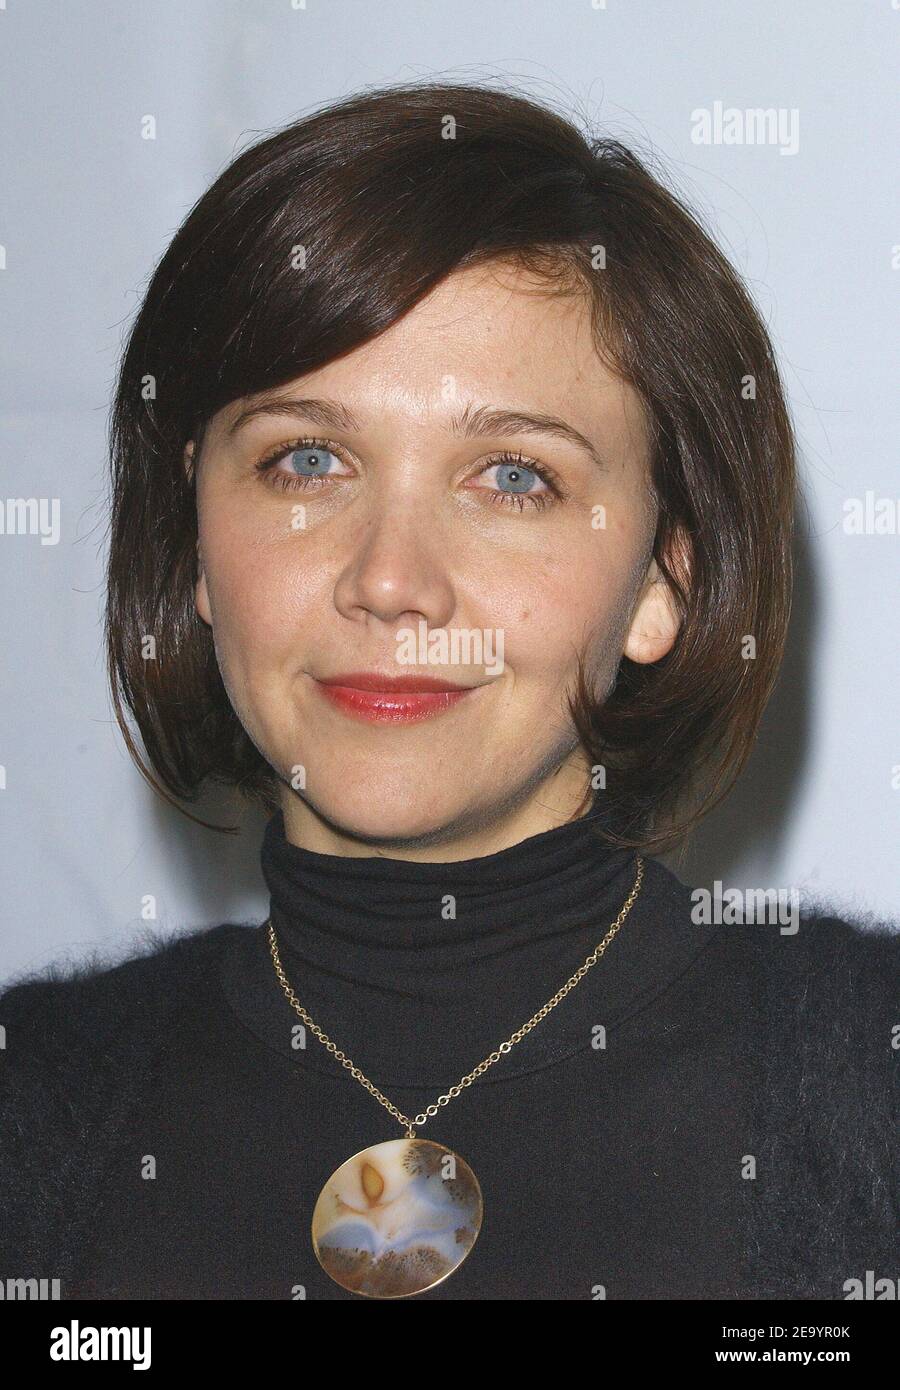 Cast member Maggie Gyllenhaal attends the 'Happy Endings' screening at the Opening Night of the 2005 Sundance Film Festival. Park City, UT. January 20, 2005. Photo by Lionel Hahn/ABACA. Stock Photo